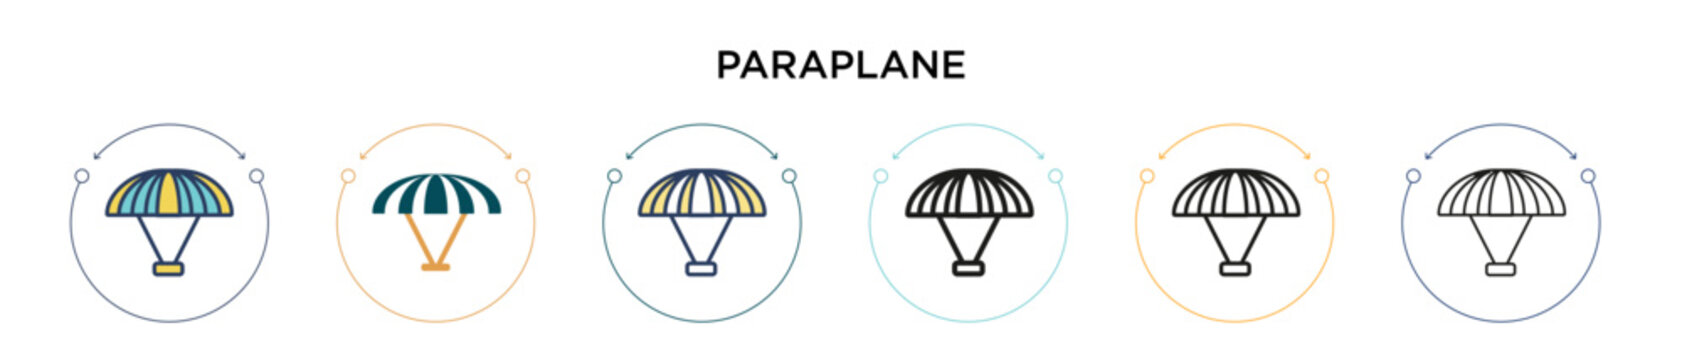 Paraplane icon in filled, thin line, outline and stroke style. Vector illustration of two colored and black paraplane vector icons designs can be used for mobile, ui, web